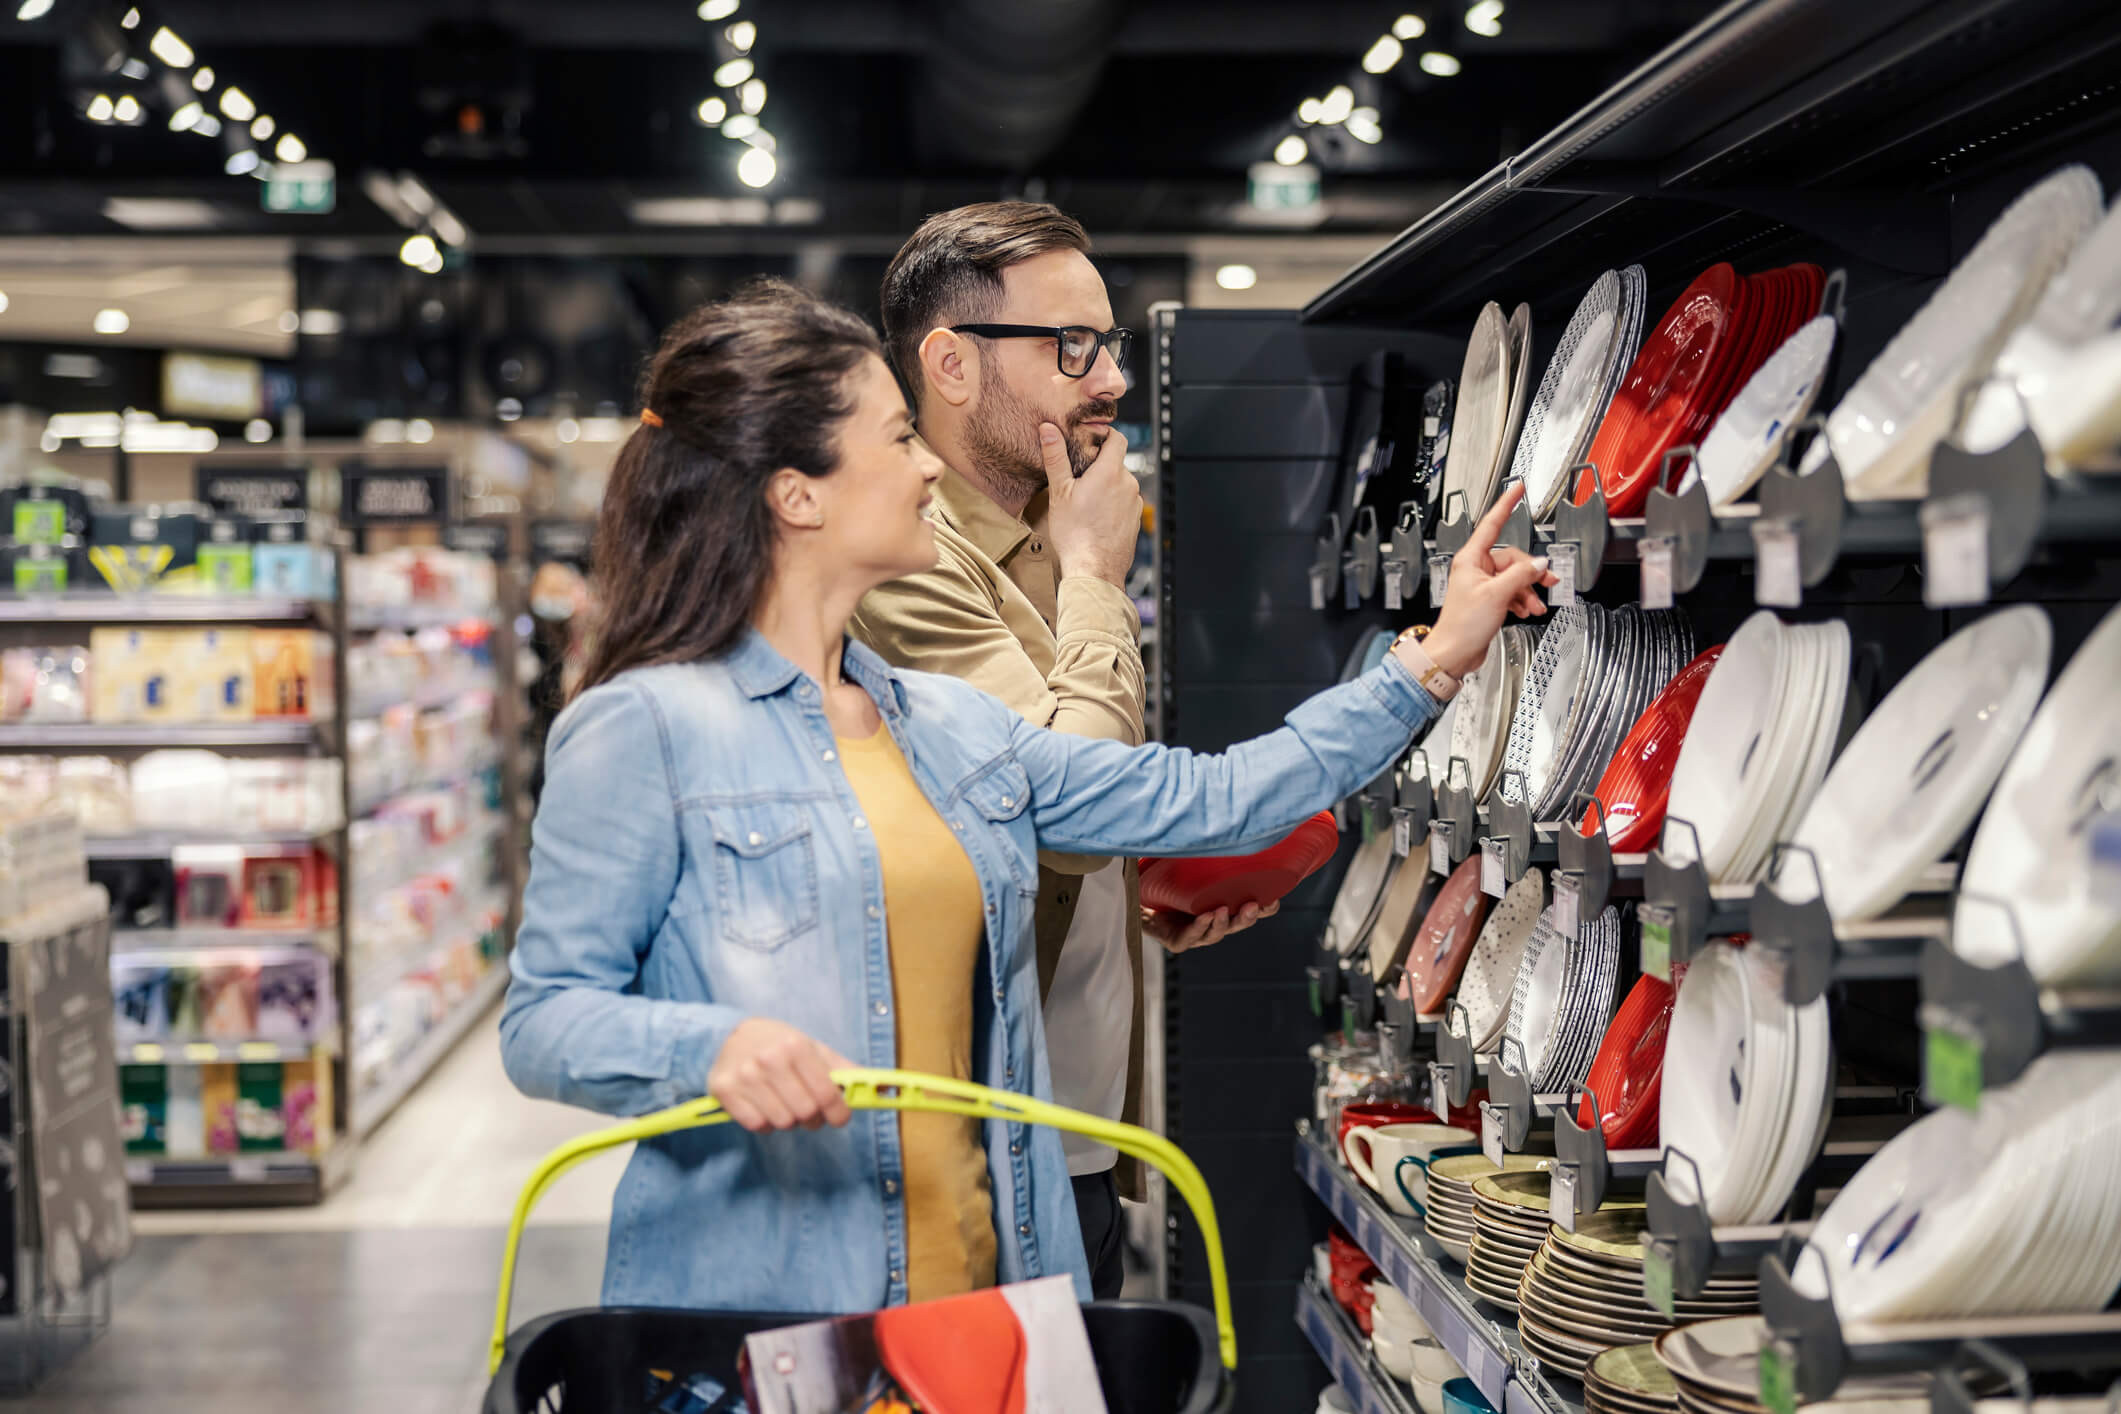 Customer Experience Trends in Retail - Complete Controller